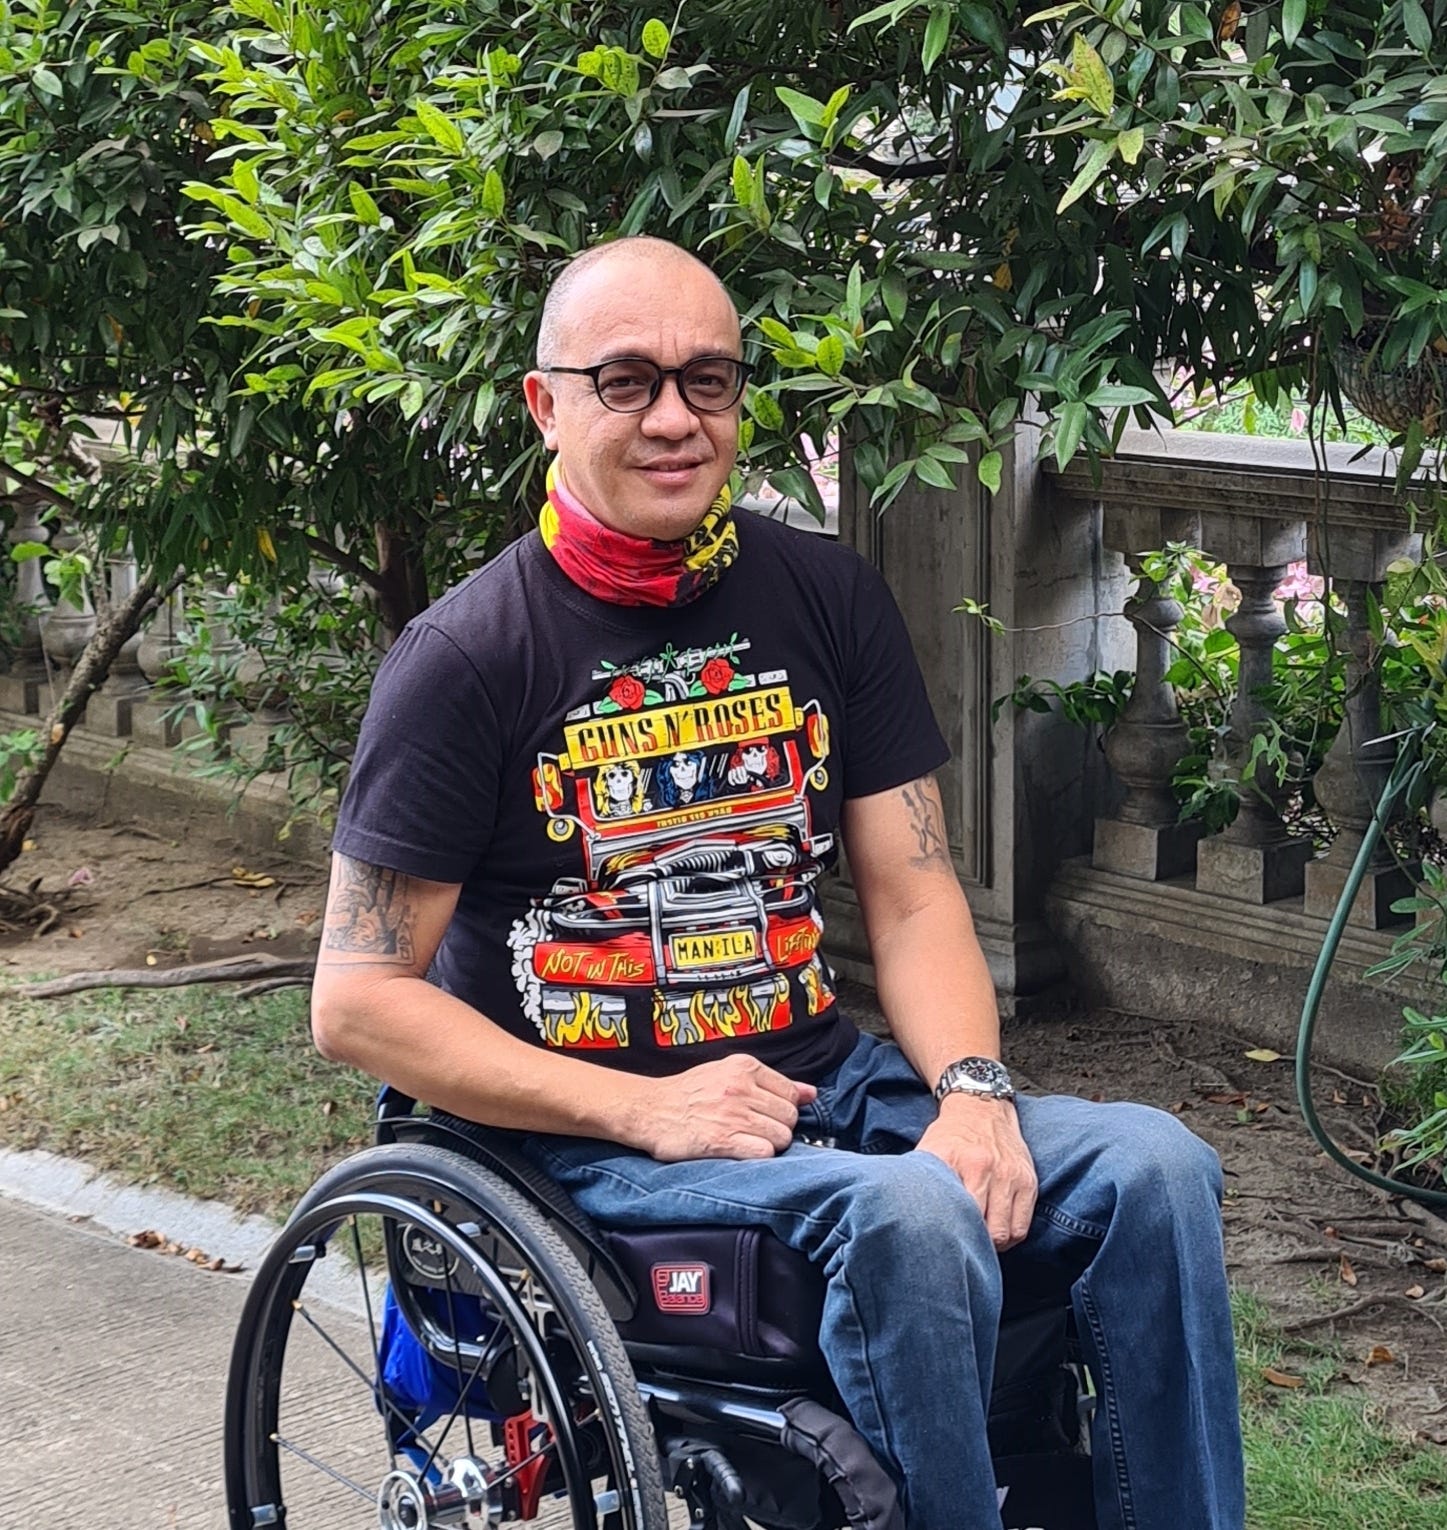 A photograph of Abner, a Phllippinian man, sitting in a wheelchair, half-smiling in a knowing way towards camera. Abner has dark circular glasses and is wearing jeans with a black Guns N’ Roses Manila t-shirt and a neck-scarf in red and yellow colours matching the t-shirt illustration. He has tattoos on his upper arms, and the background is green vegetation with an elegant stone wall. 